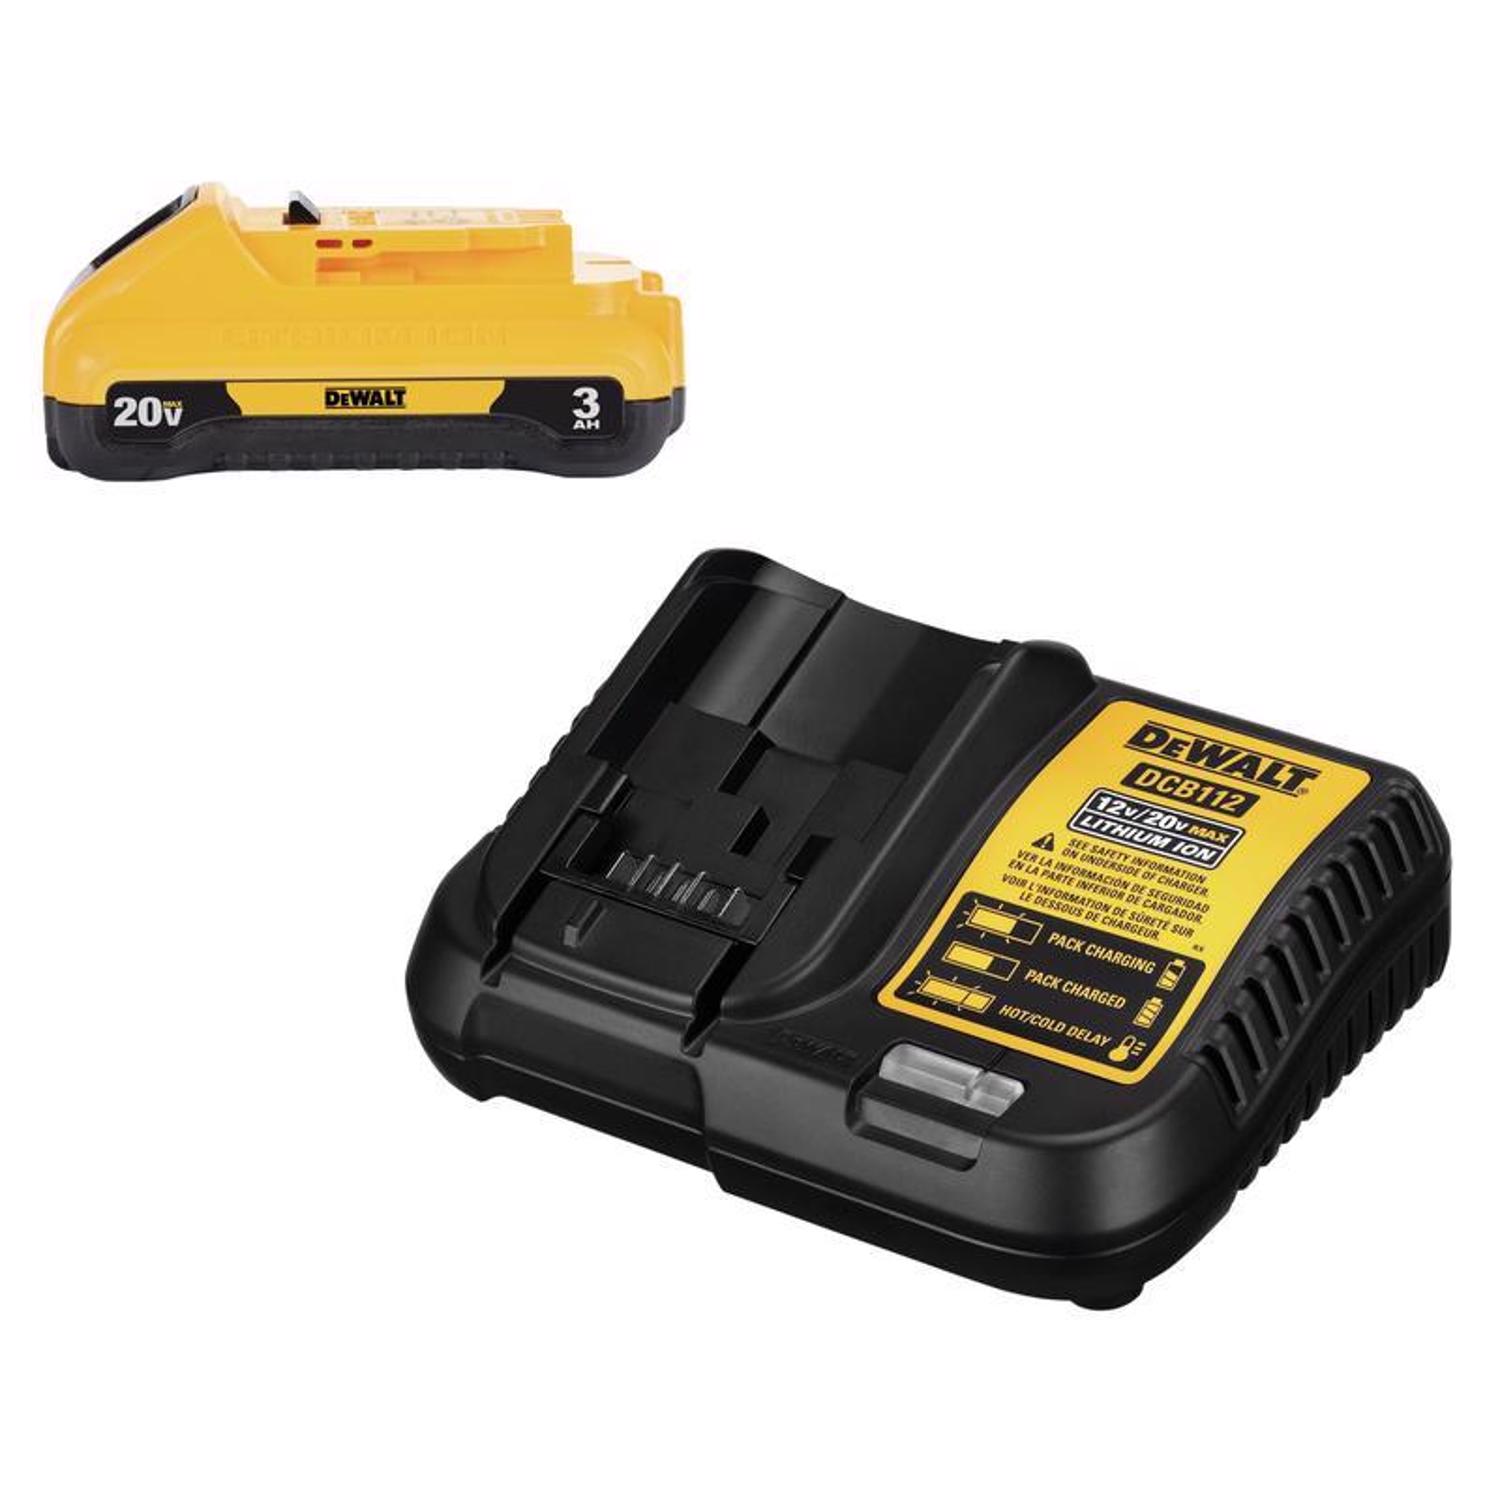 Photos - Power Tool Battery DeWALT 20V MAX DCB230C 3 Ah Lithium-Ion Compact Battery and Charger Starte 